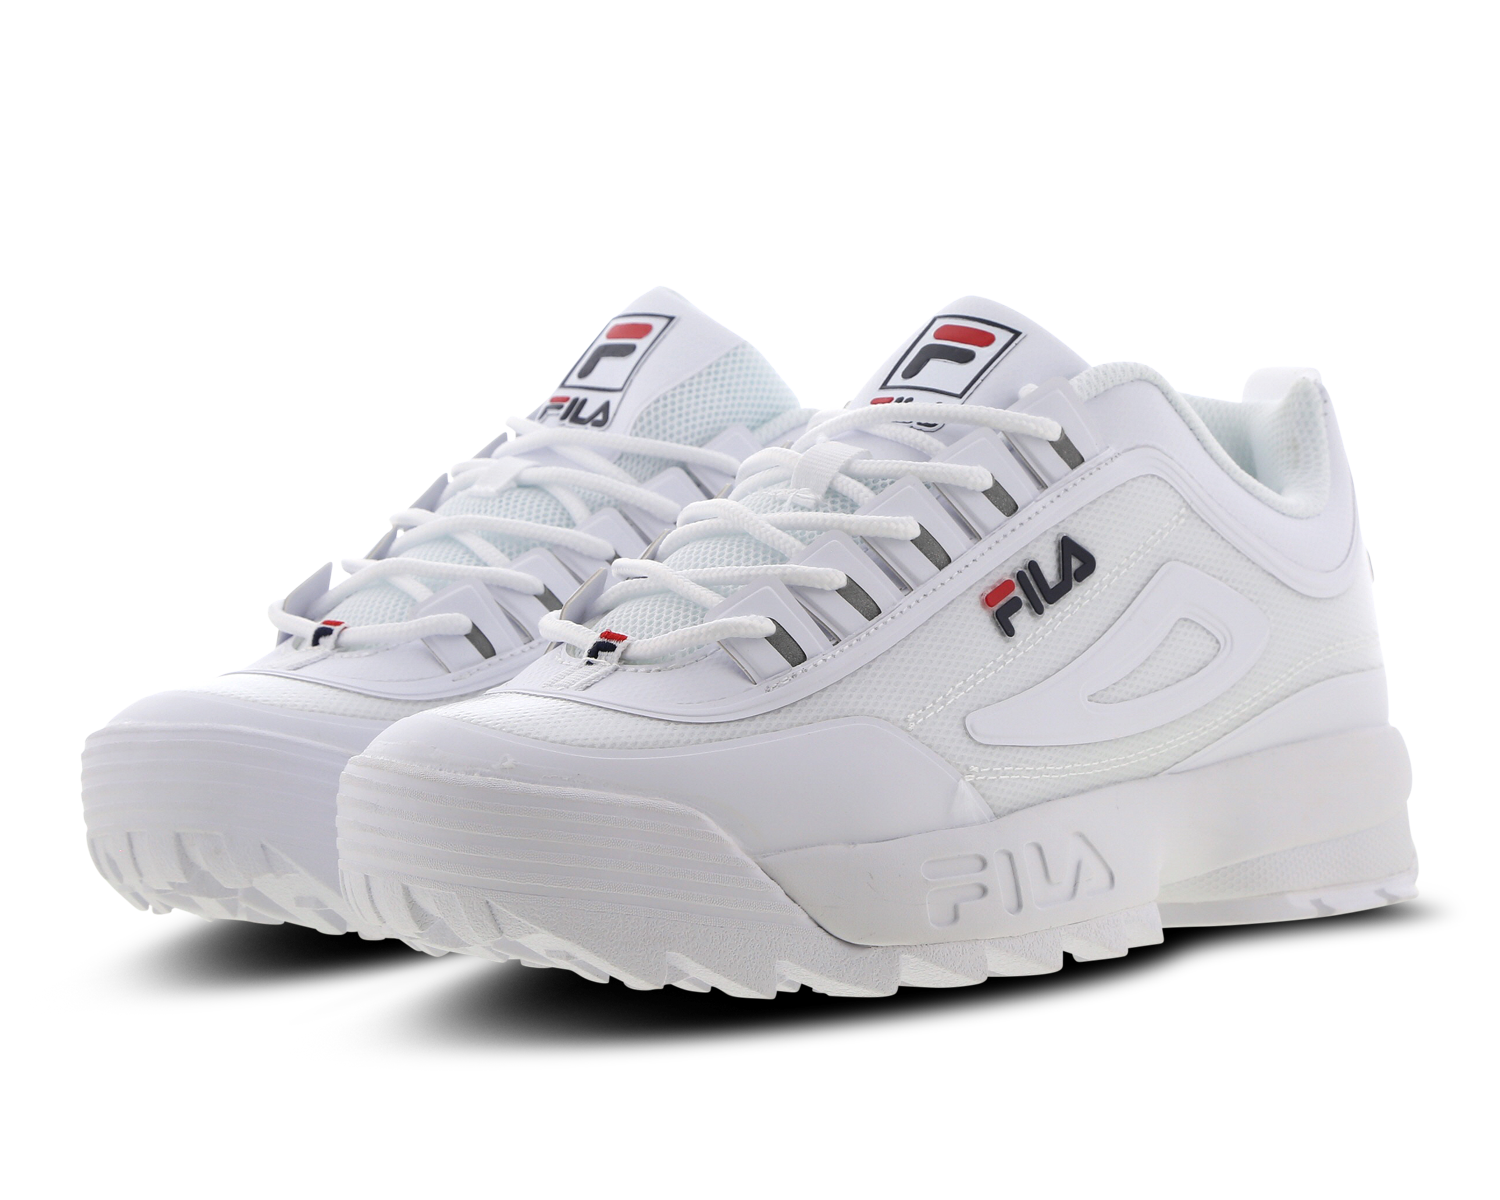 fila shoes with spikes